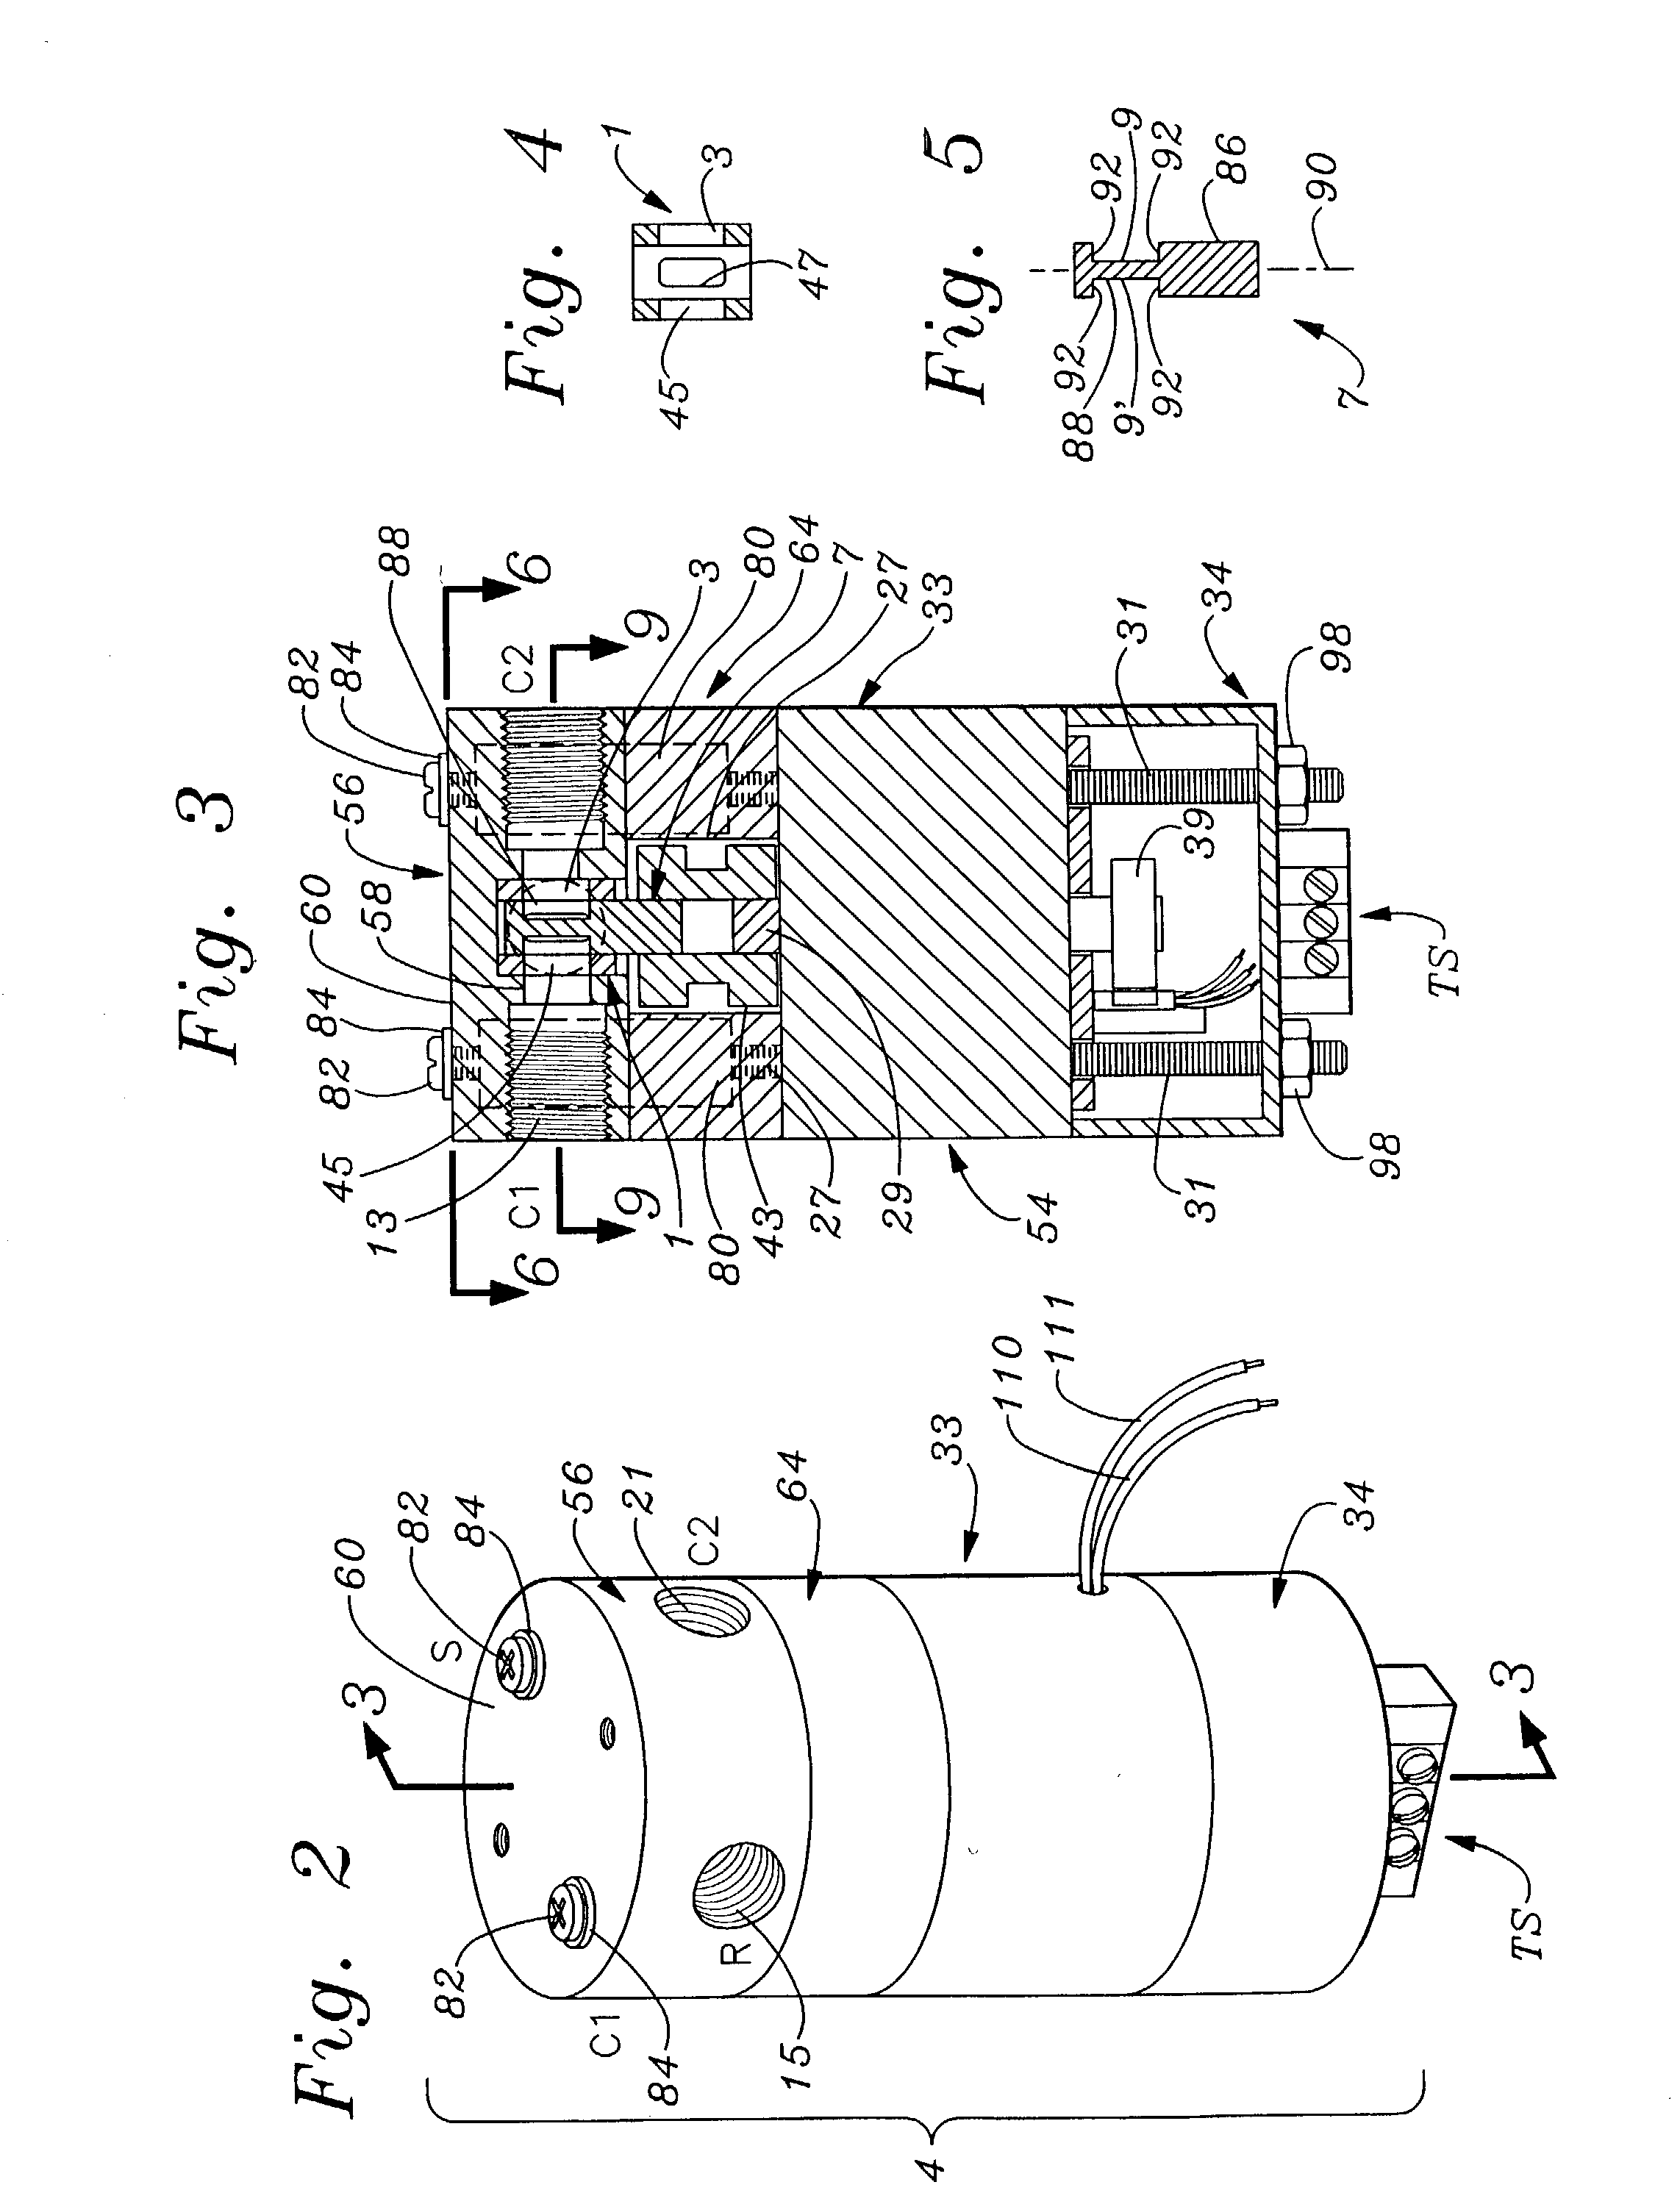 Rotary servovalve with precision controller